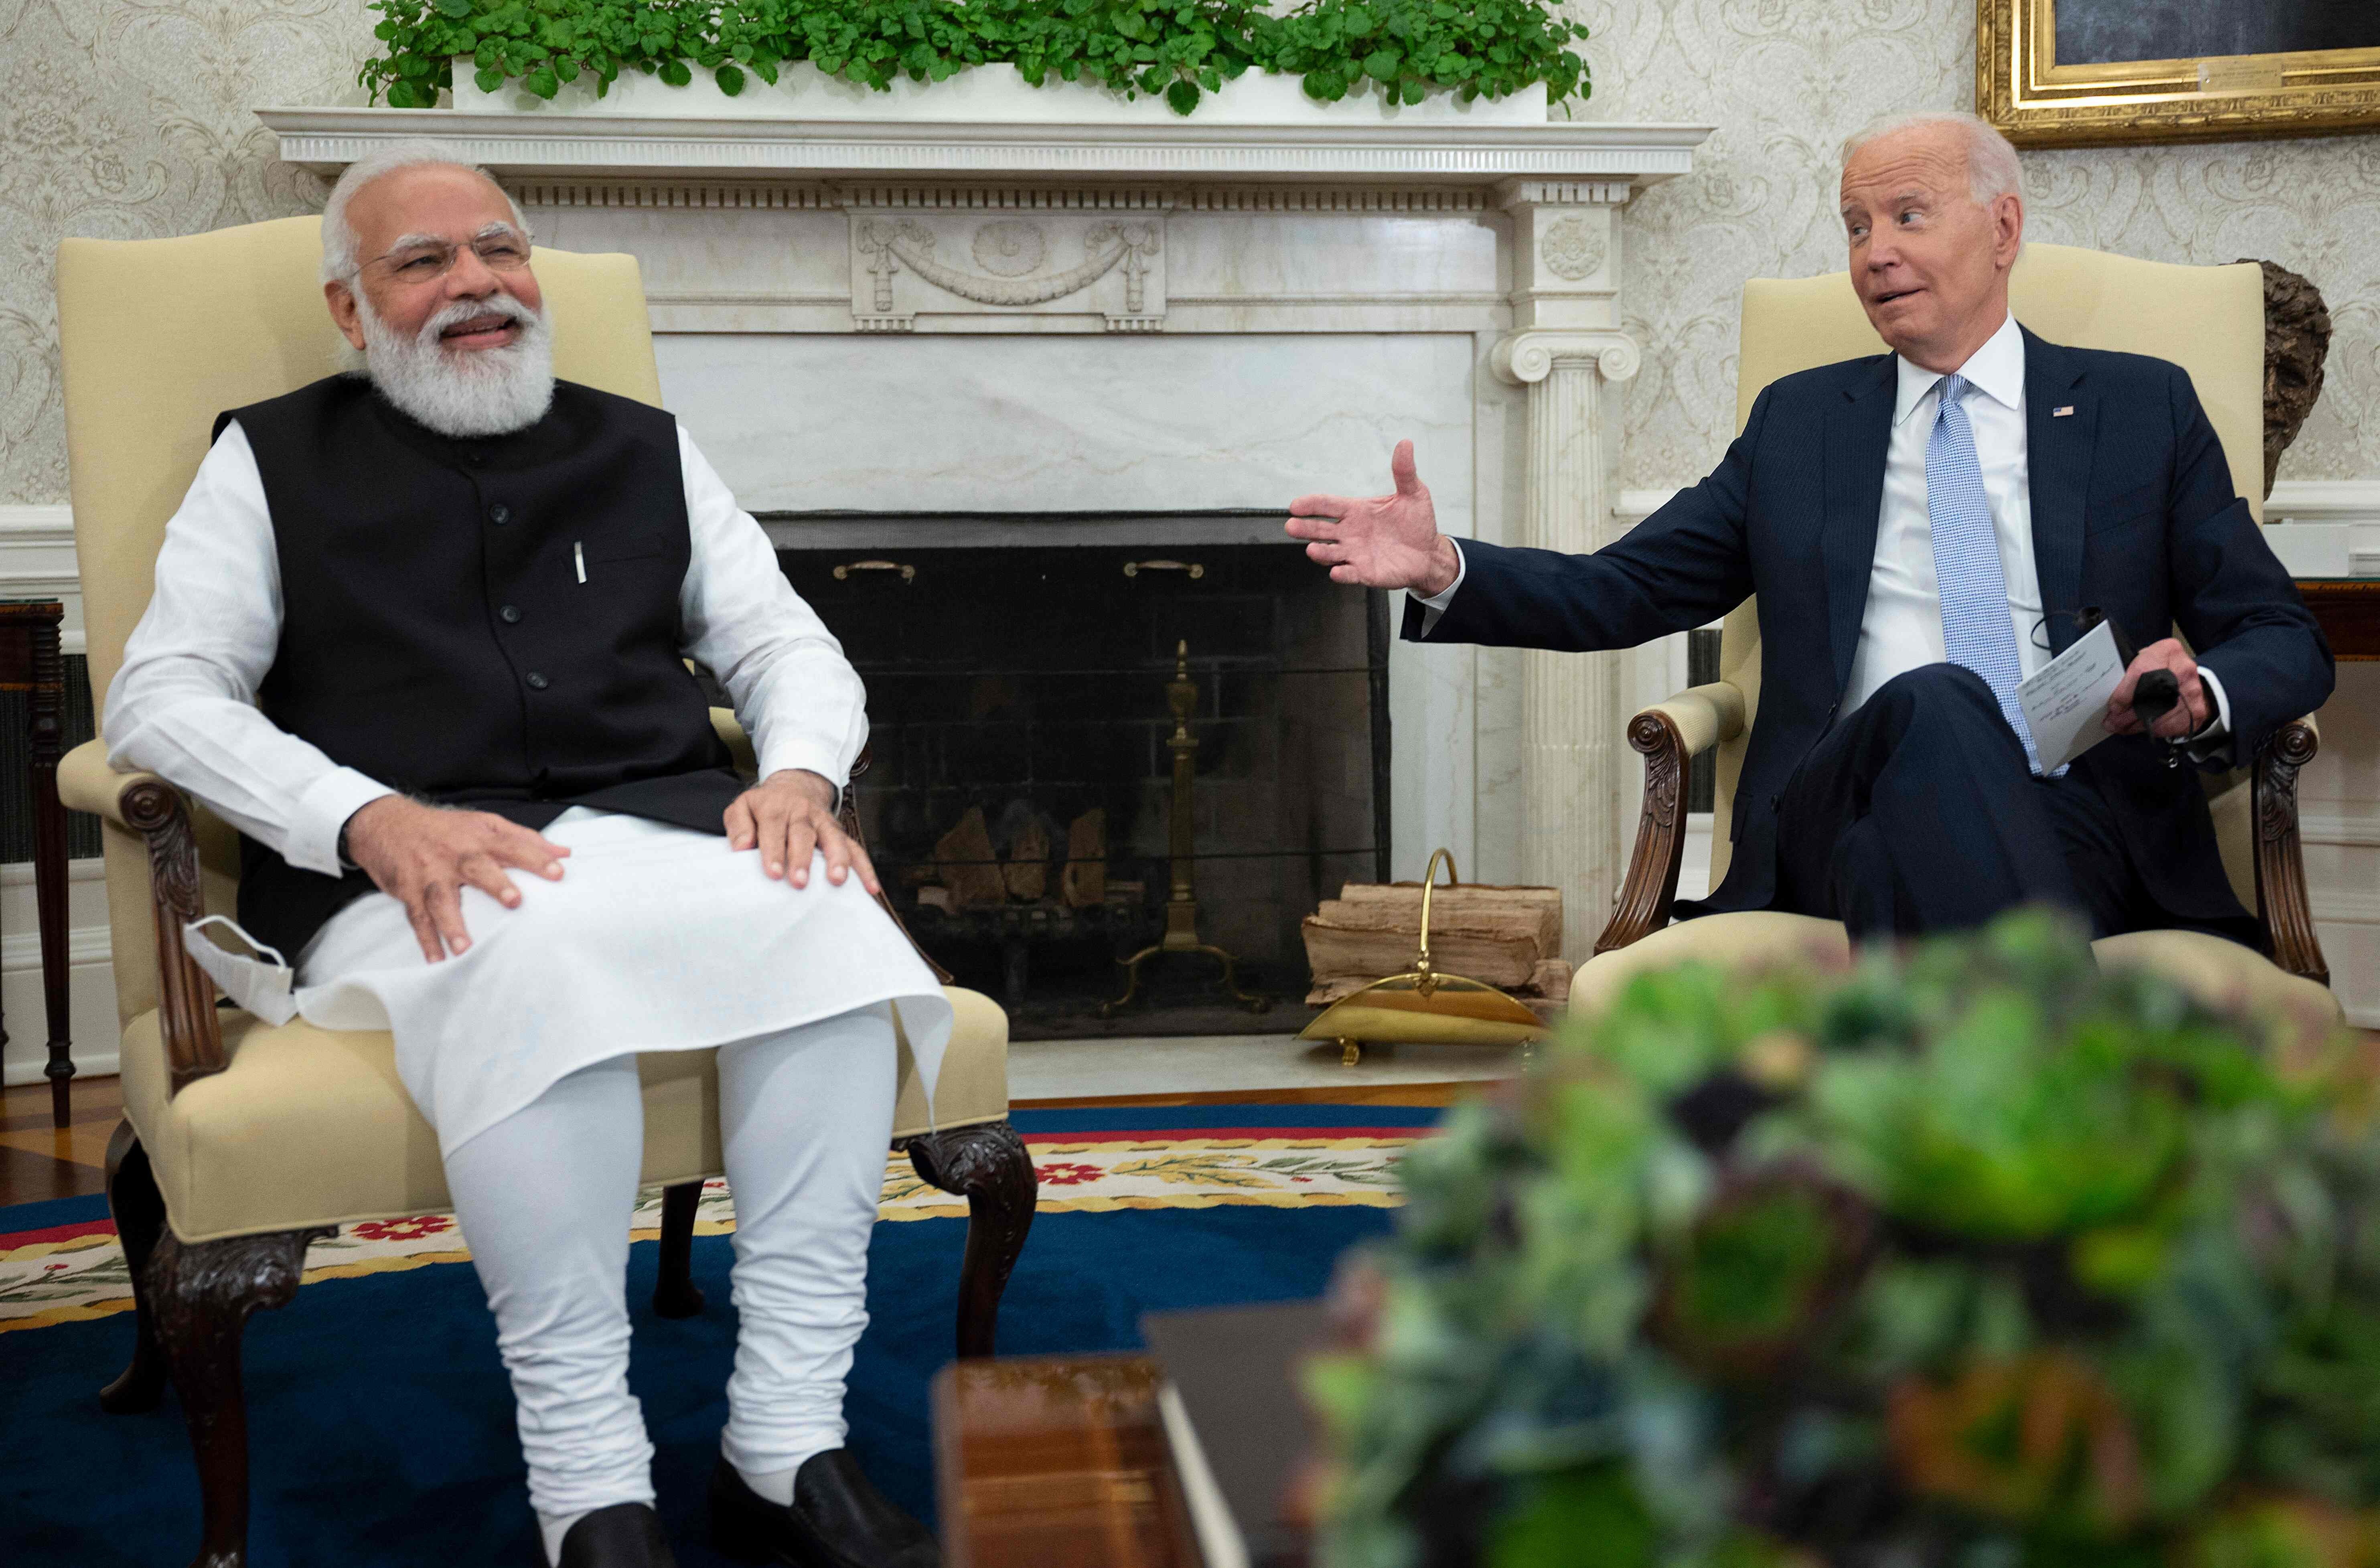 US President Joe Biden meets with Indian Prime Minister Narendra Modi in the Oval Office of the White House on Friday. Photo: AFP